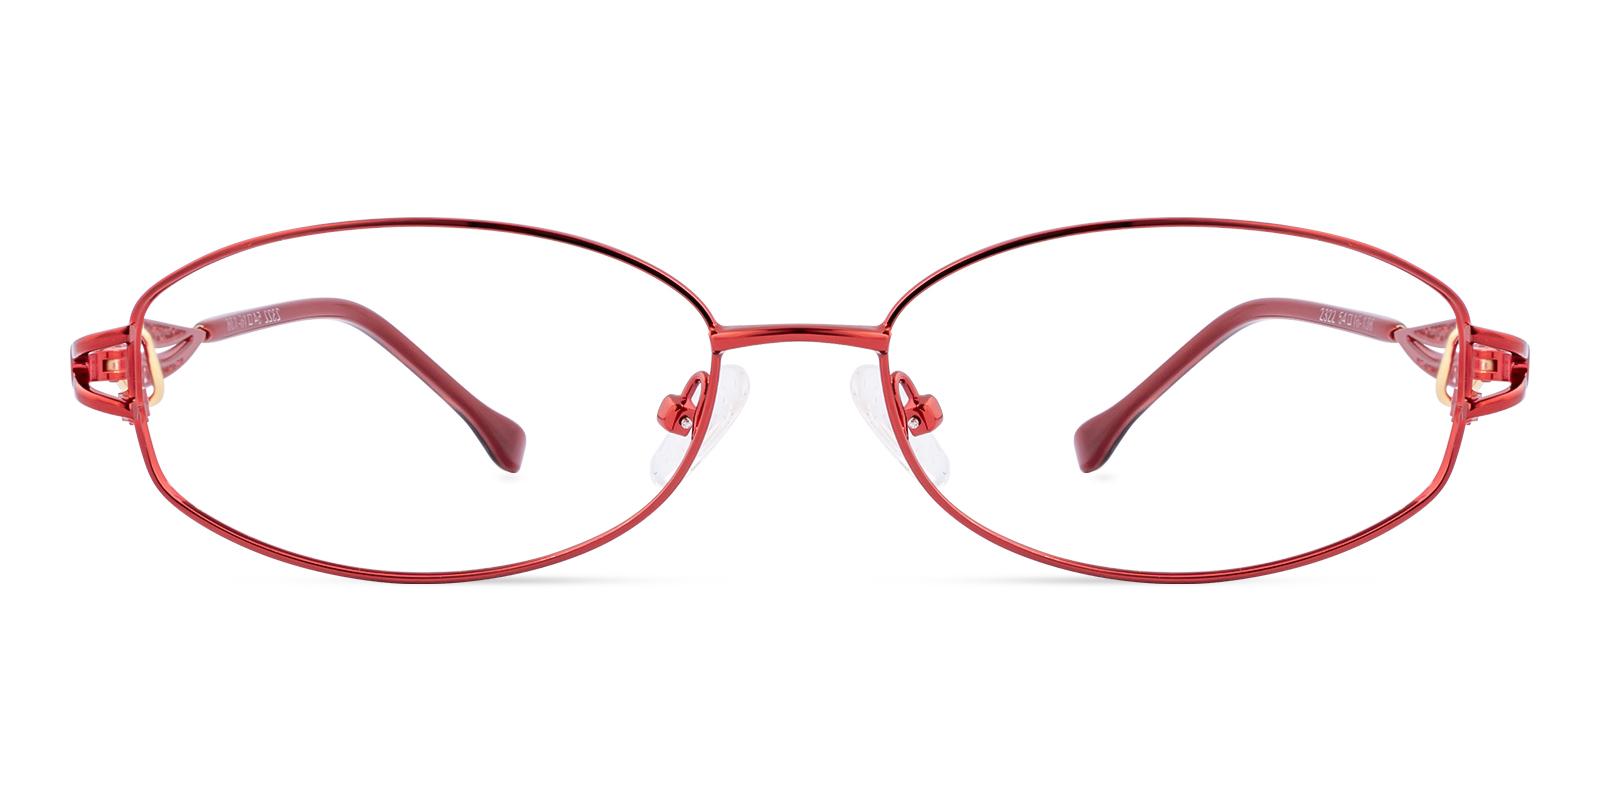 Glplious Red Metal Eyeglasses , NosePads Frames from ABBE Glasses